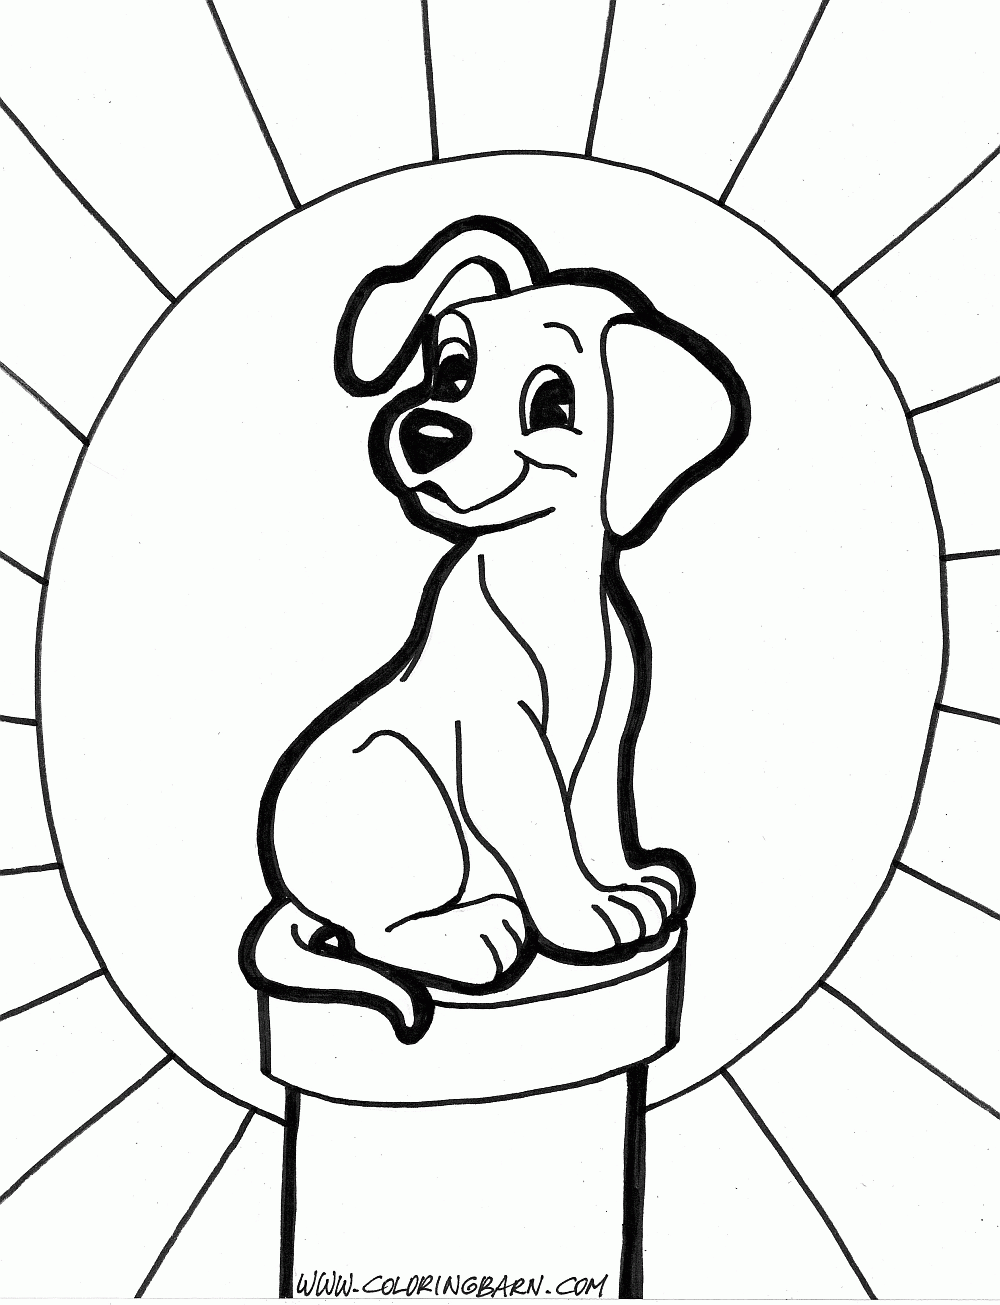 colouring pages of a dog free printable dog coloring pages for kids of dog a colouring pages 